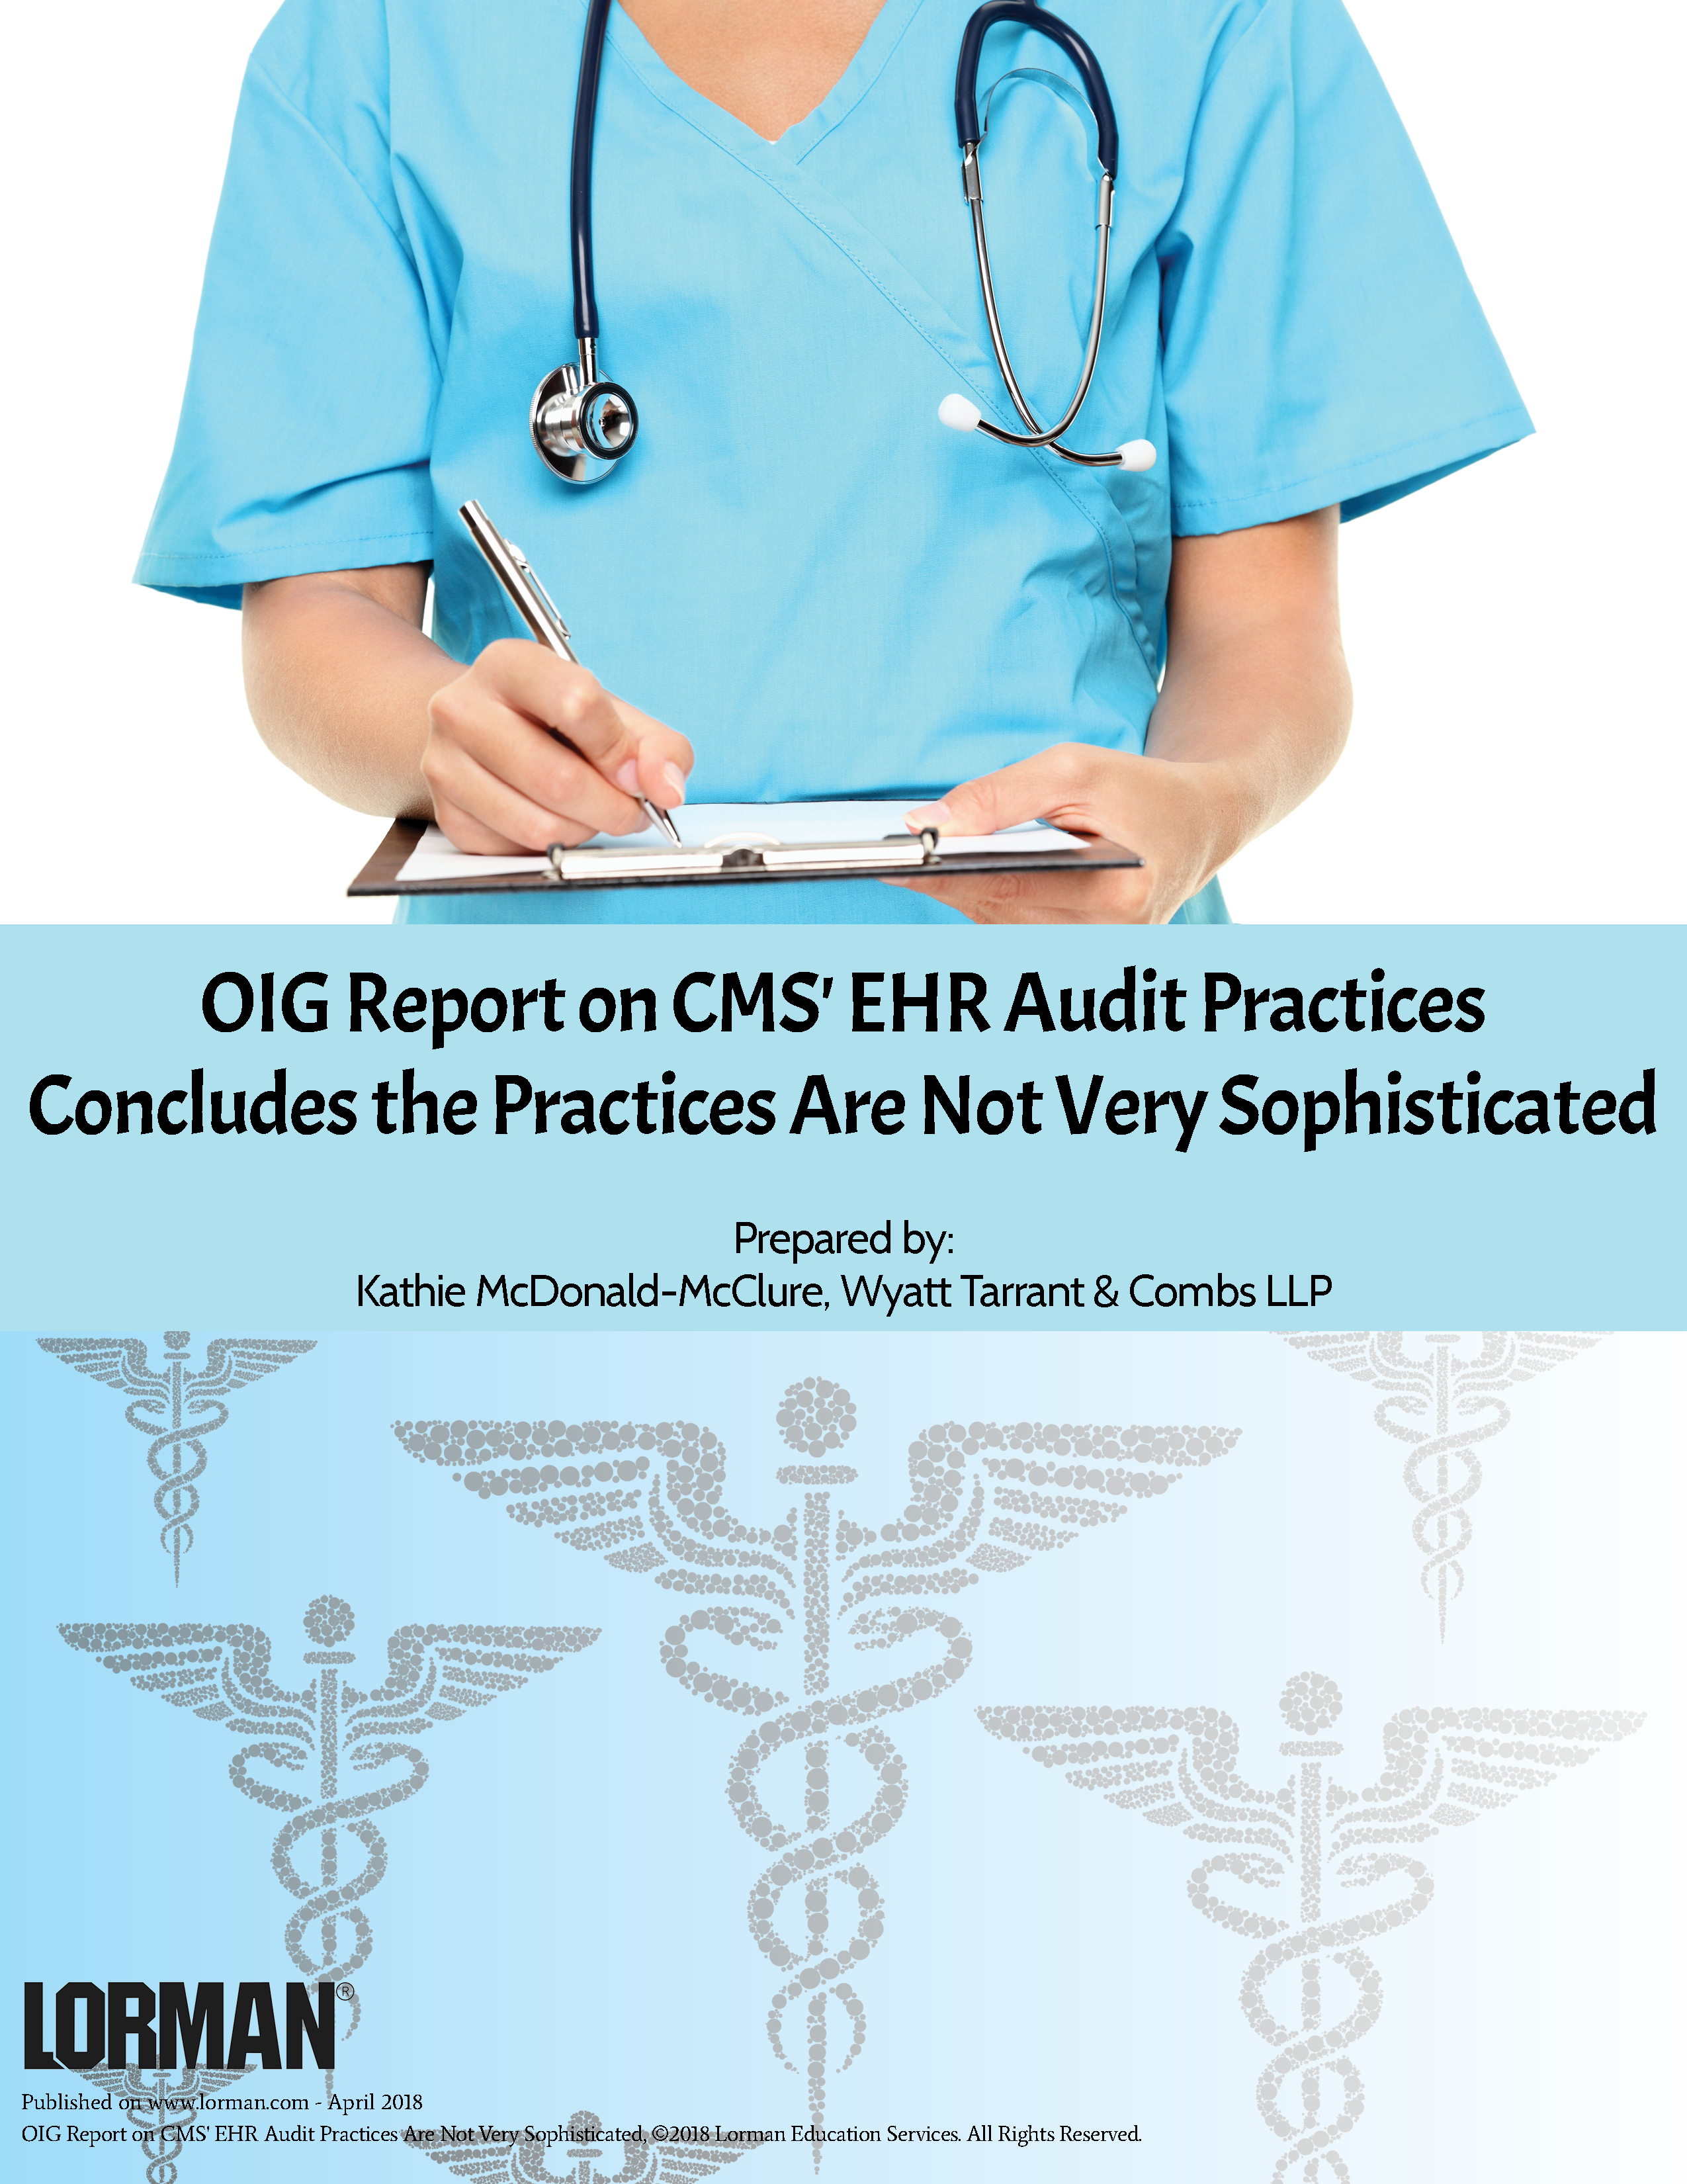 OIG Report on CMS’ EHR Audit Practices Concludes The Practices Are Not Very Sophisticated